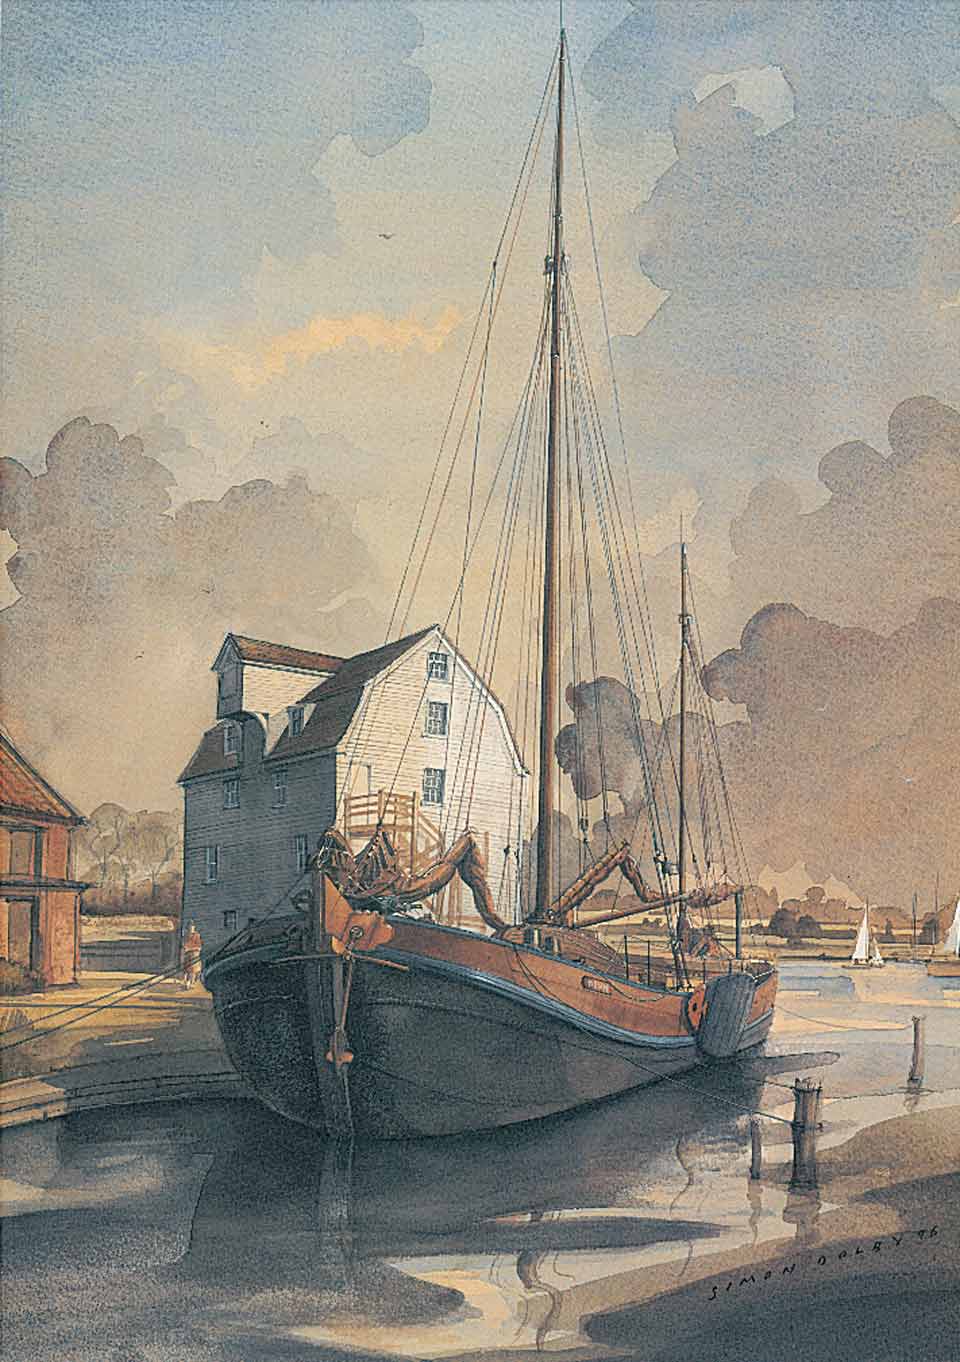 Dutch Barge at Woodbridge Suffolk by Simon Dolby at The Dolby Gallery Oundle